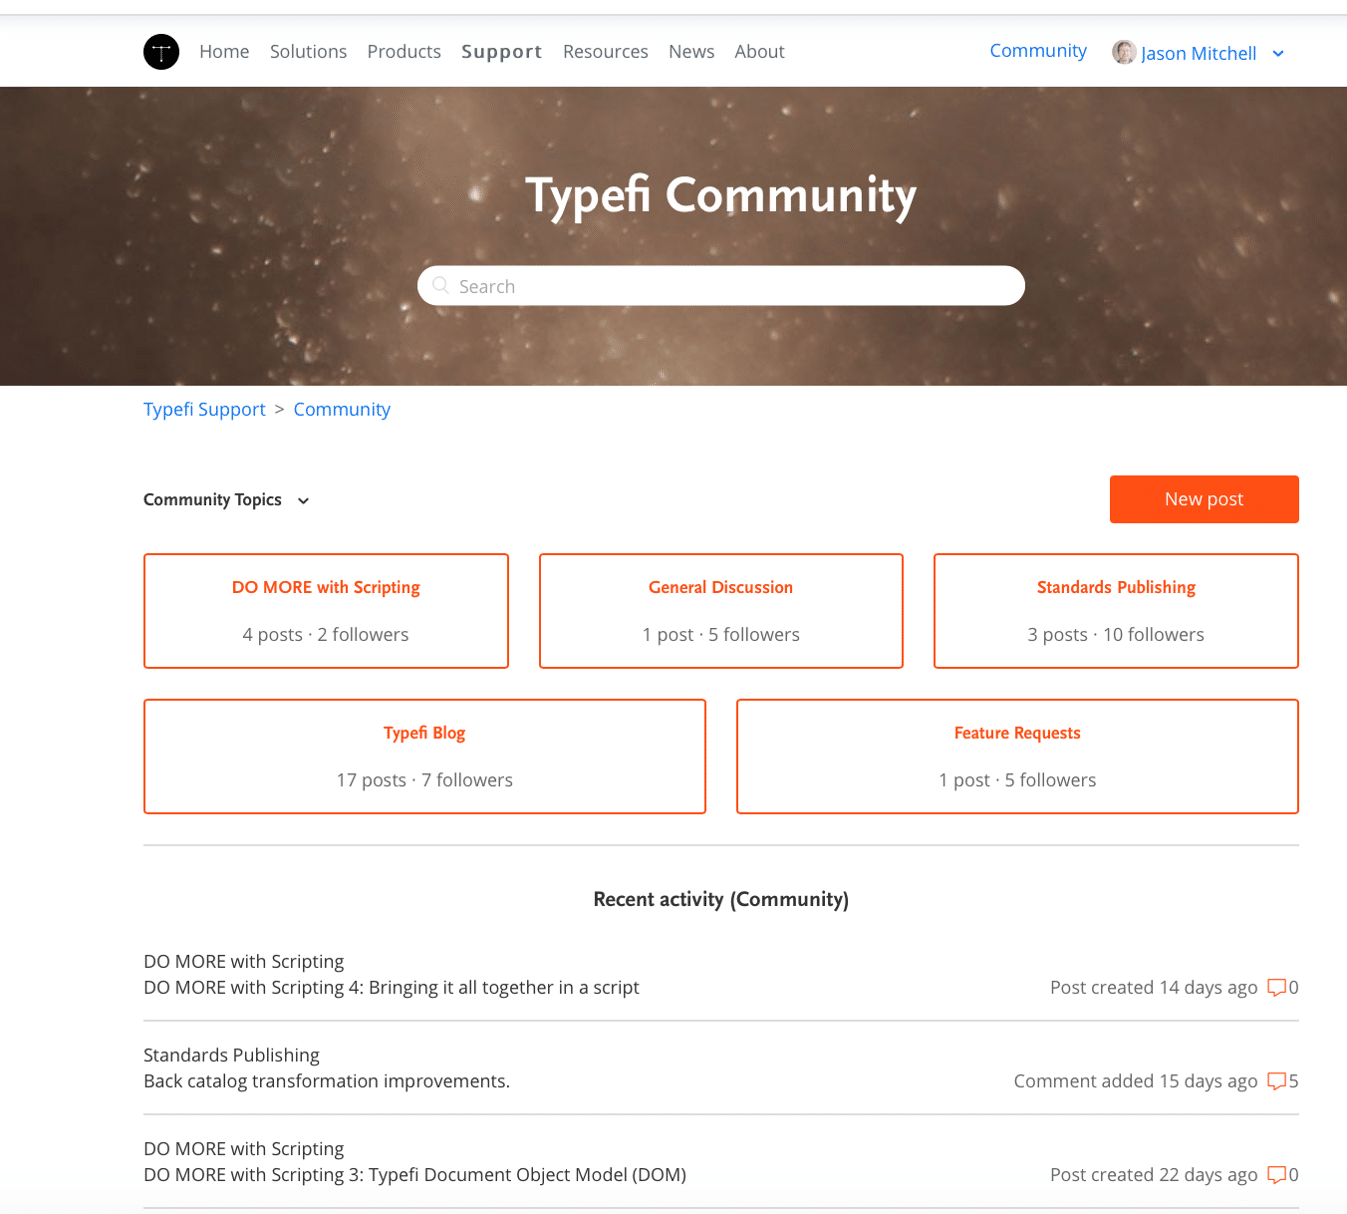 A screenshot of the Typefi Community homepage, showing a search bar, community forum topics, and recent activity.